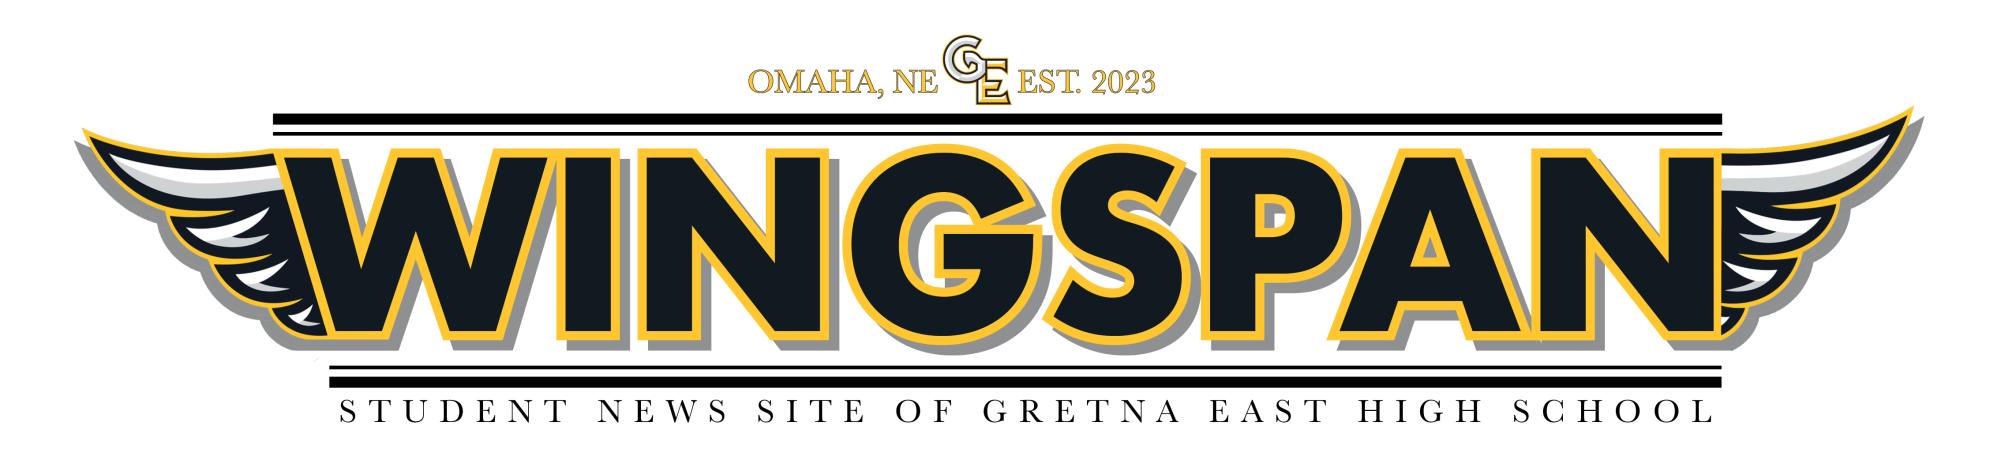 The Student News Site of Gretna East High School